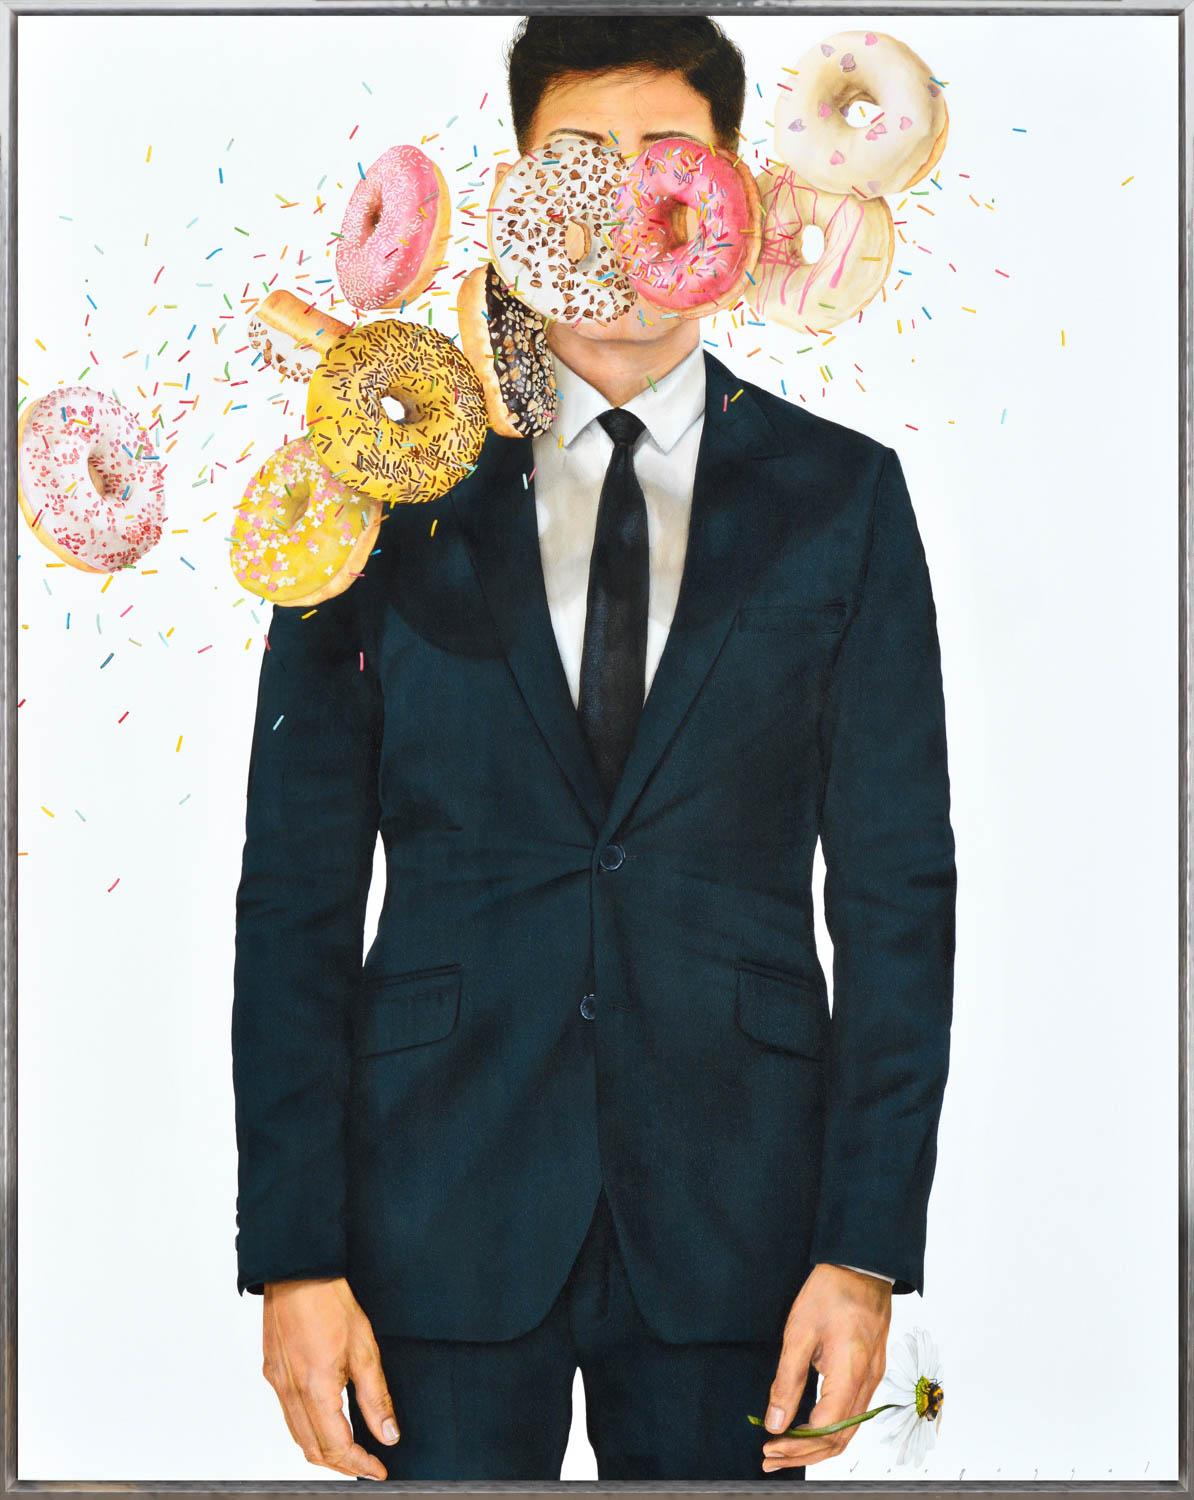 "Insatiable" is a framed acrylic work on canvas by Ariel Vargassal, depicting a man in a suit being bombarded by sugary donuts while holding a dainty daisy complete with a bumblebee. The hyperrealistic style includes a stunning amount of detail,